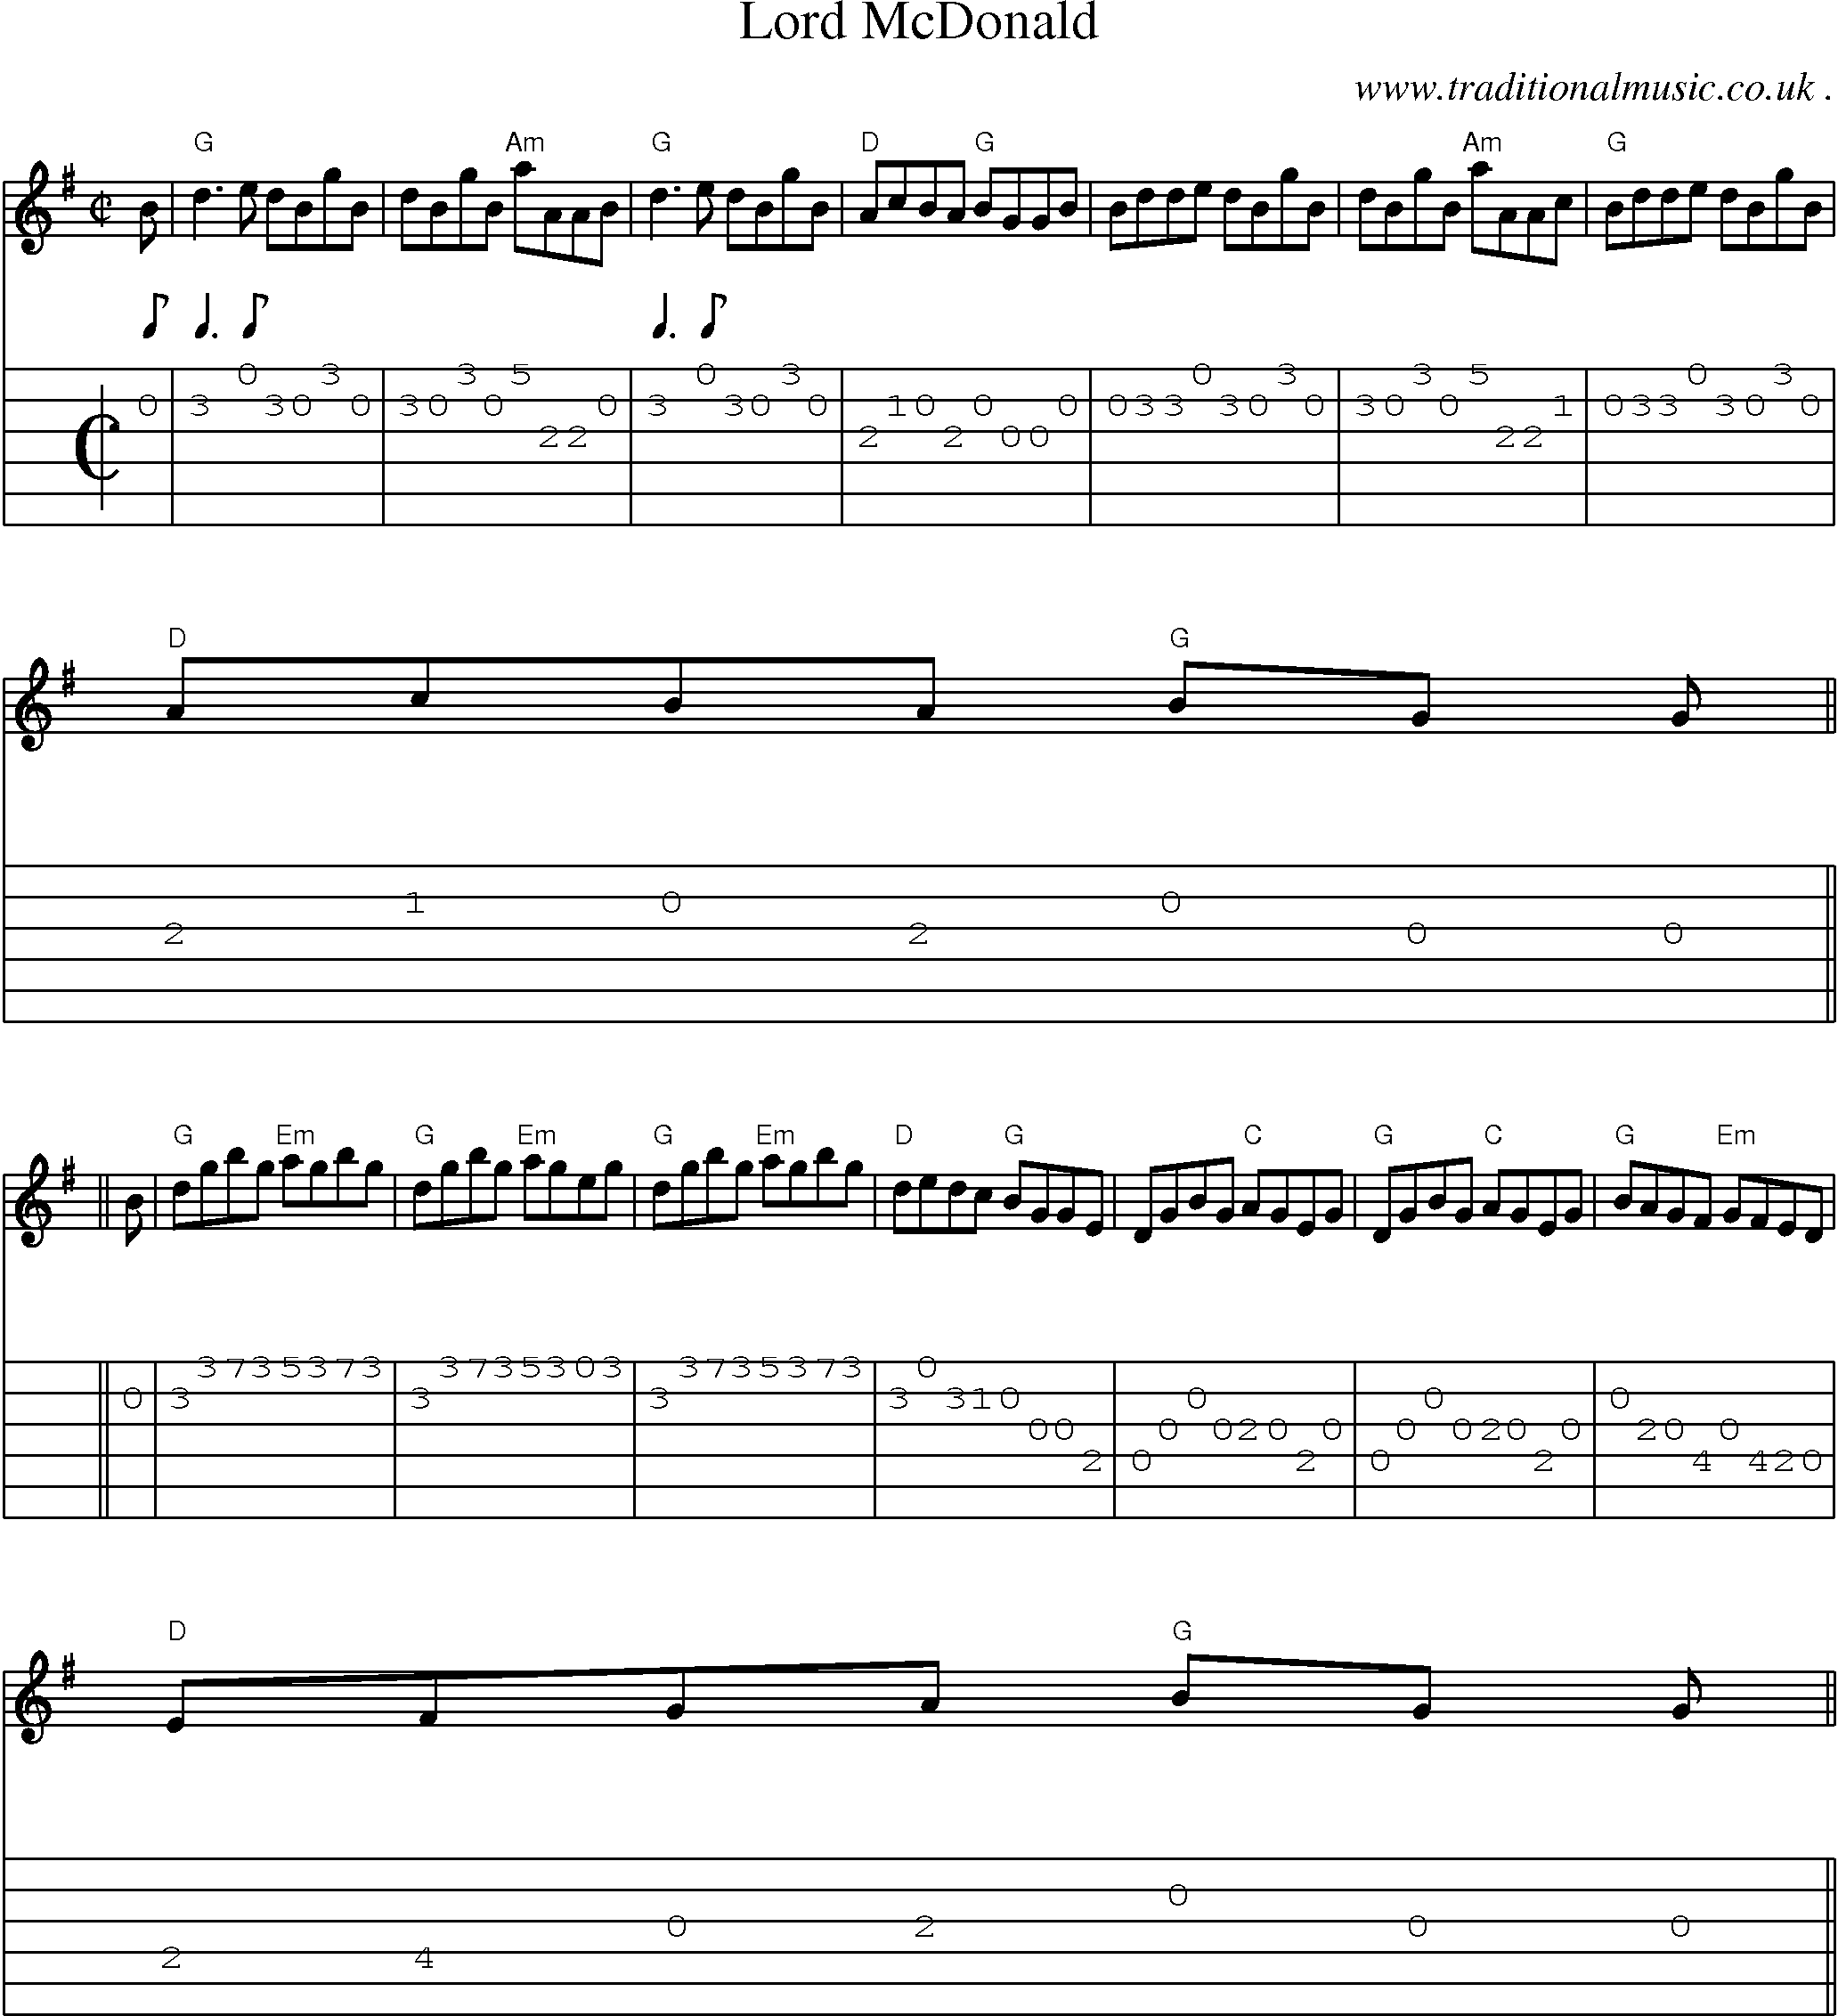 Music Score and Guitar Tabs for Lord Mcdonald